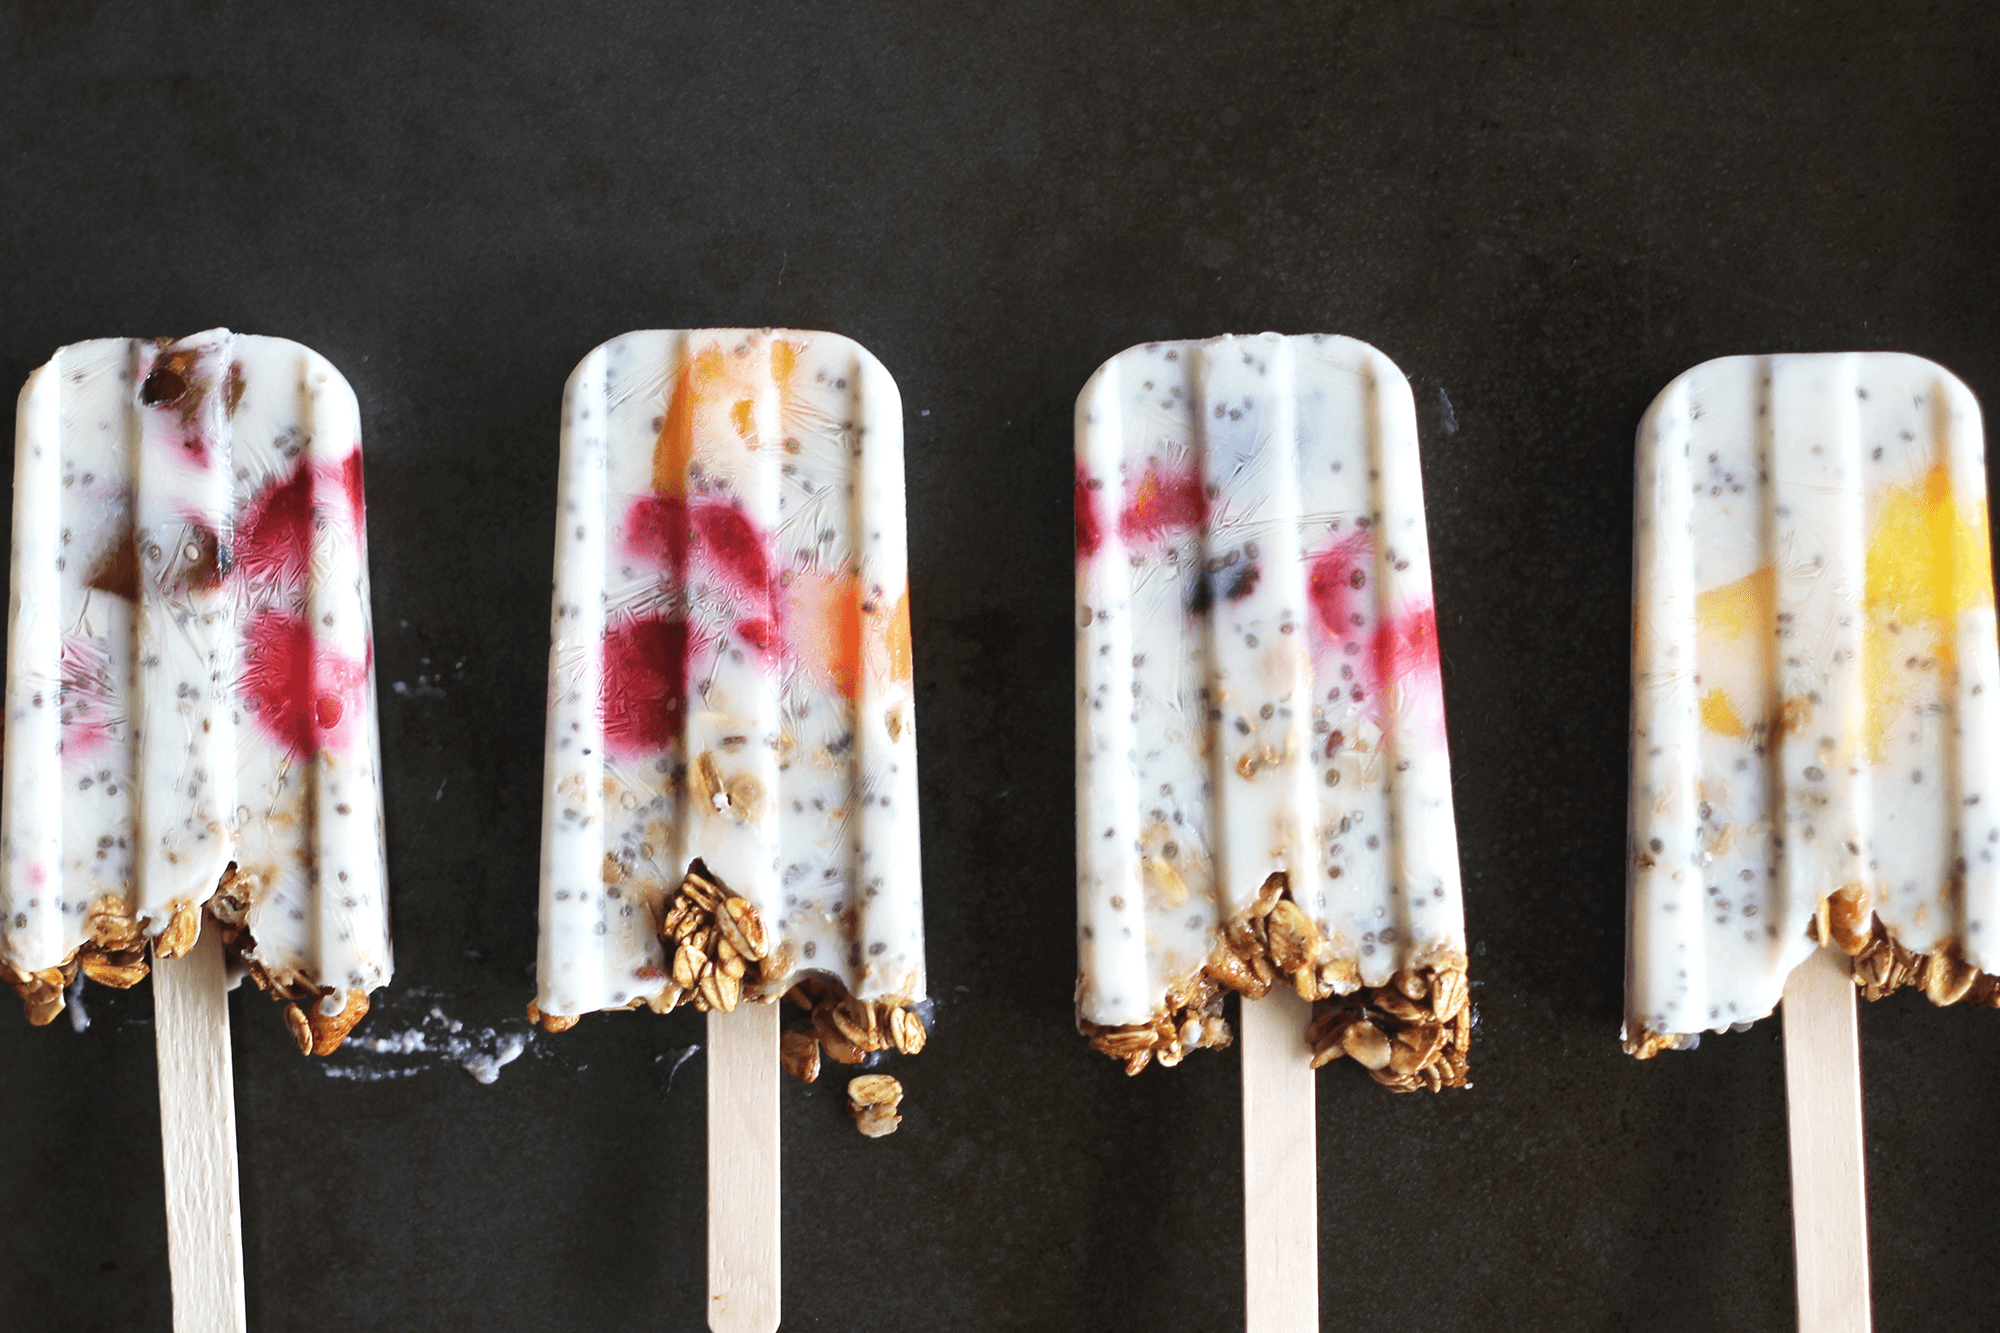 20 Summer-Inspired Meals Your Clients Will Love: Chia Seed Breakfast Popsicles